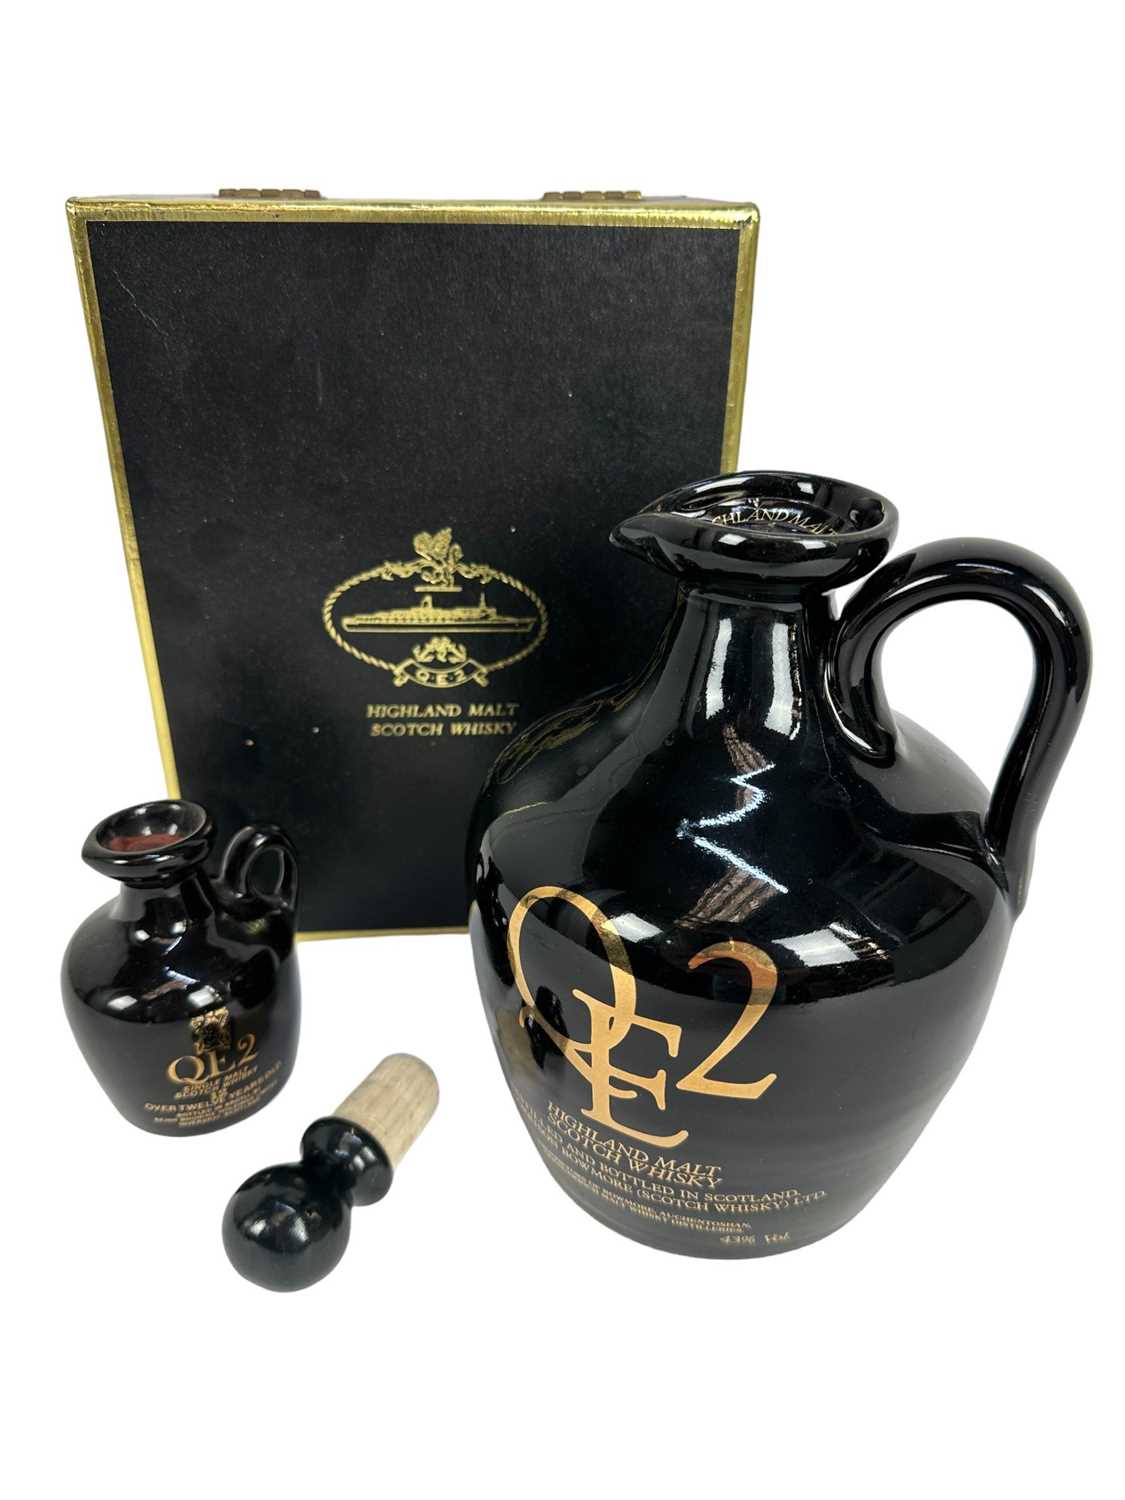 Lot 28 - Whisky - two bottles, QE2 Highland Malt Scotch Whisky 75cl ceramic flagon 43%, in presentation box, together with a miniature version (2)